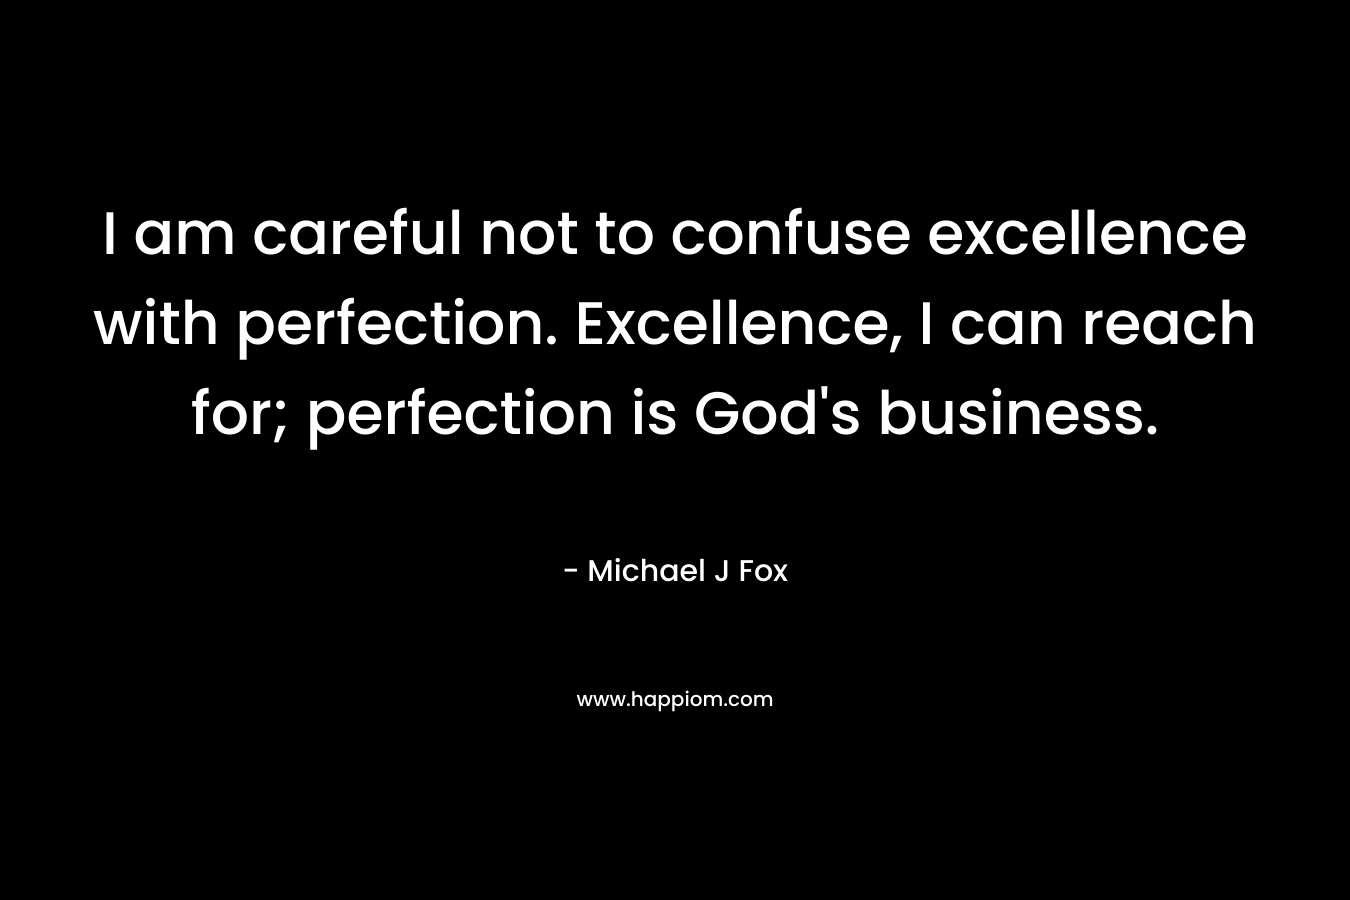 I am careful not to confuse excellence with perfection. Excellence, I can reach for; perfection is God’s business. – Michael J Fox